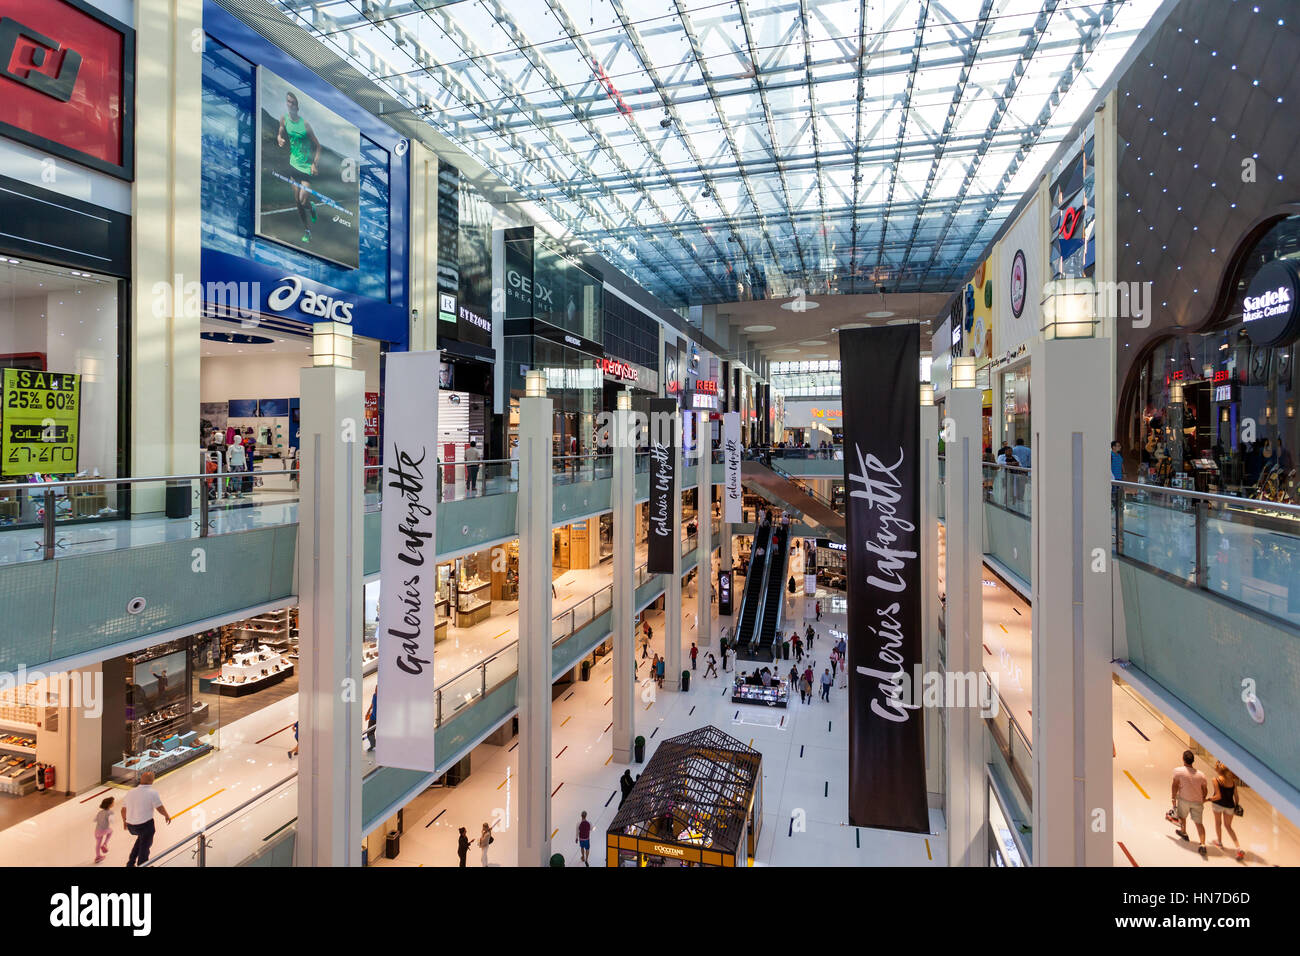 Louis vuitton shop mall emirates hi-res stock photography and images - Alamy